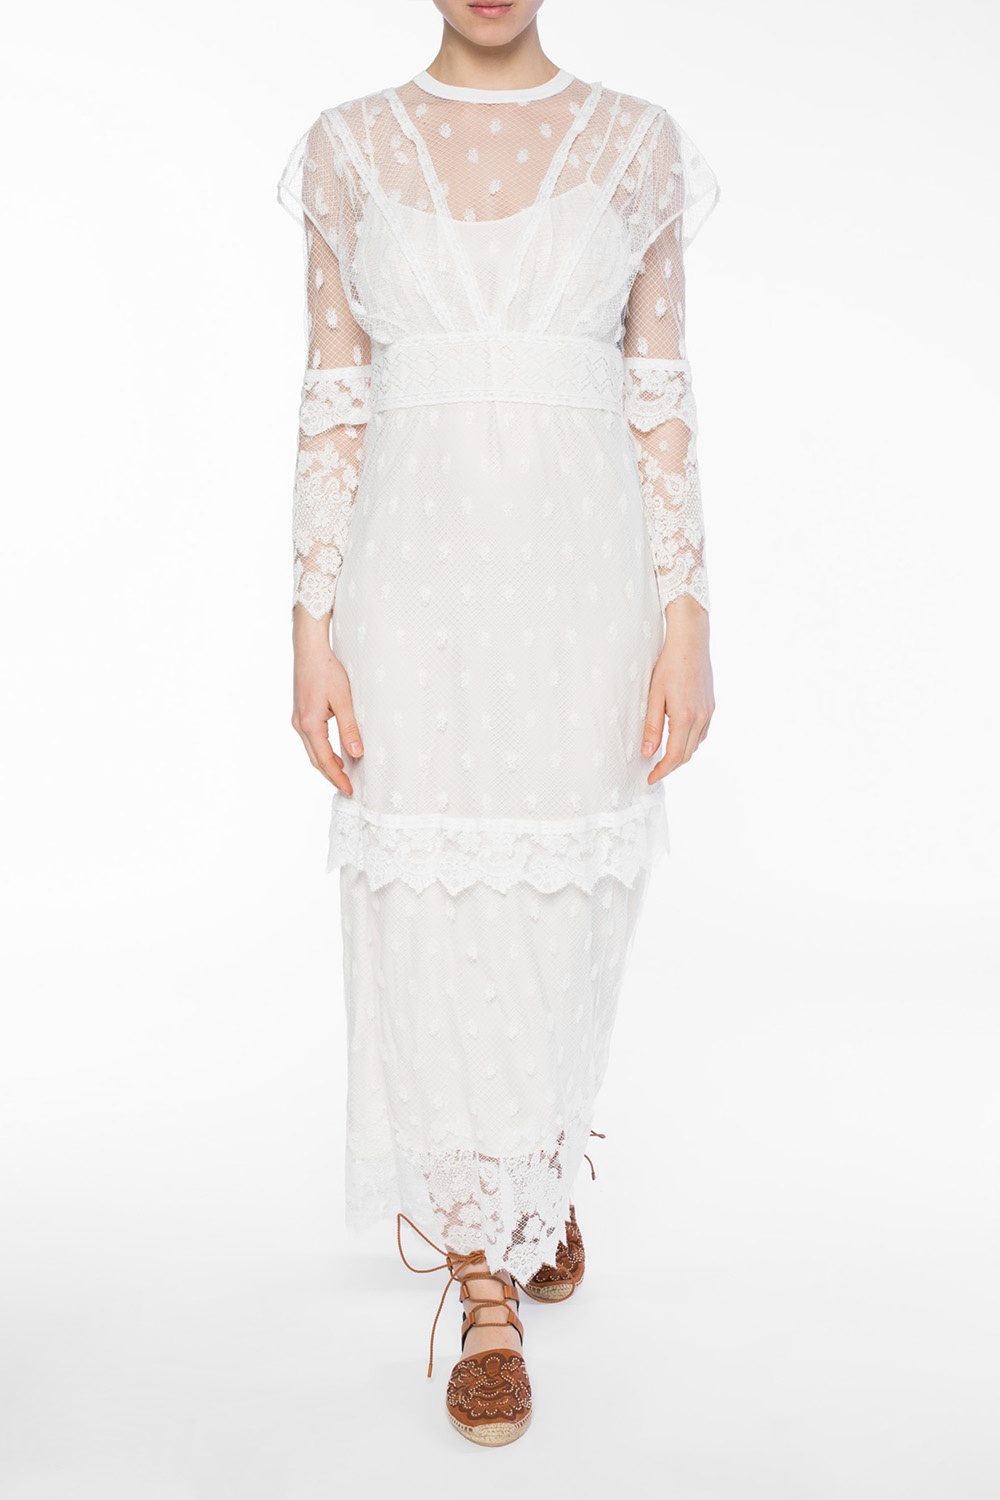 burberry white lace dress